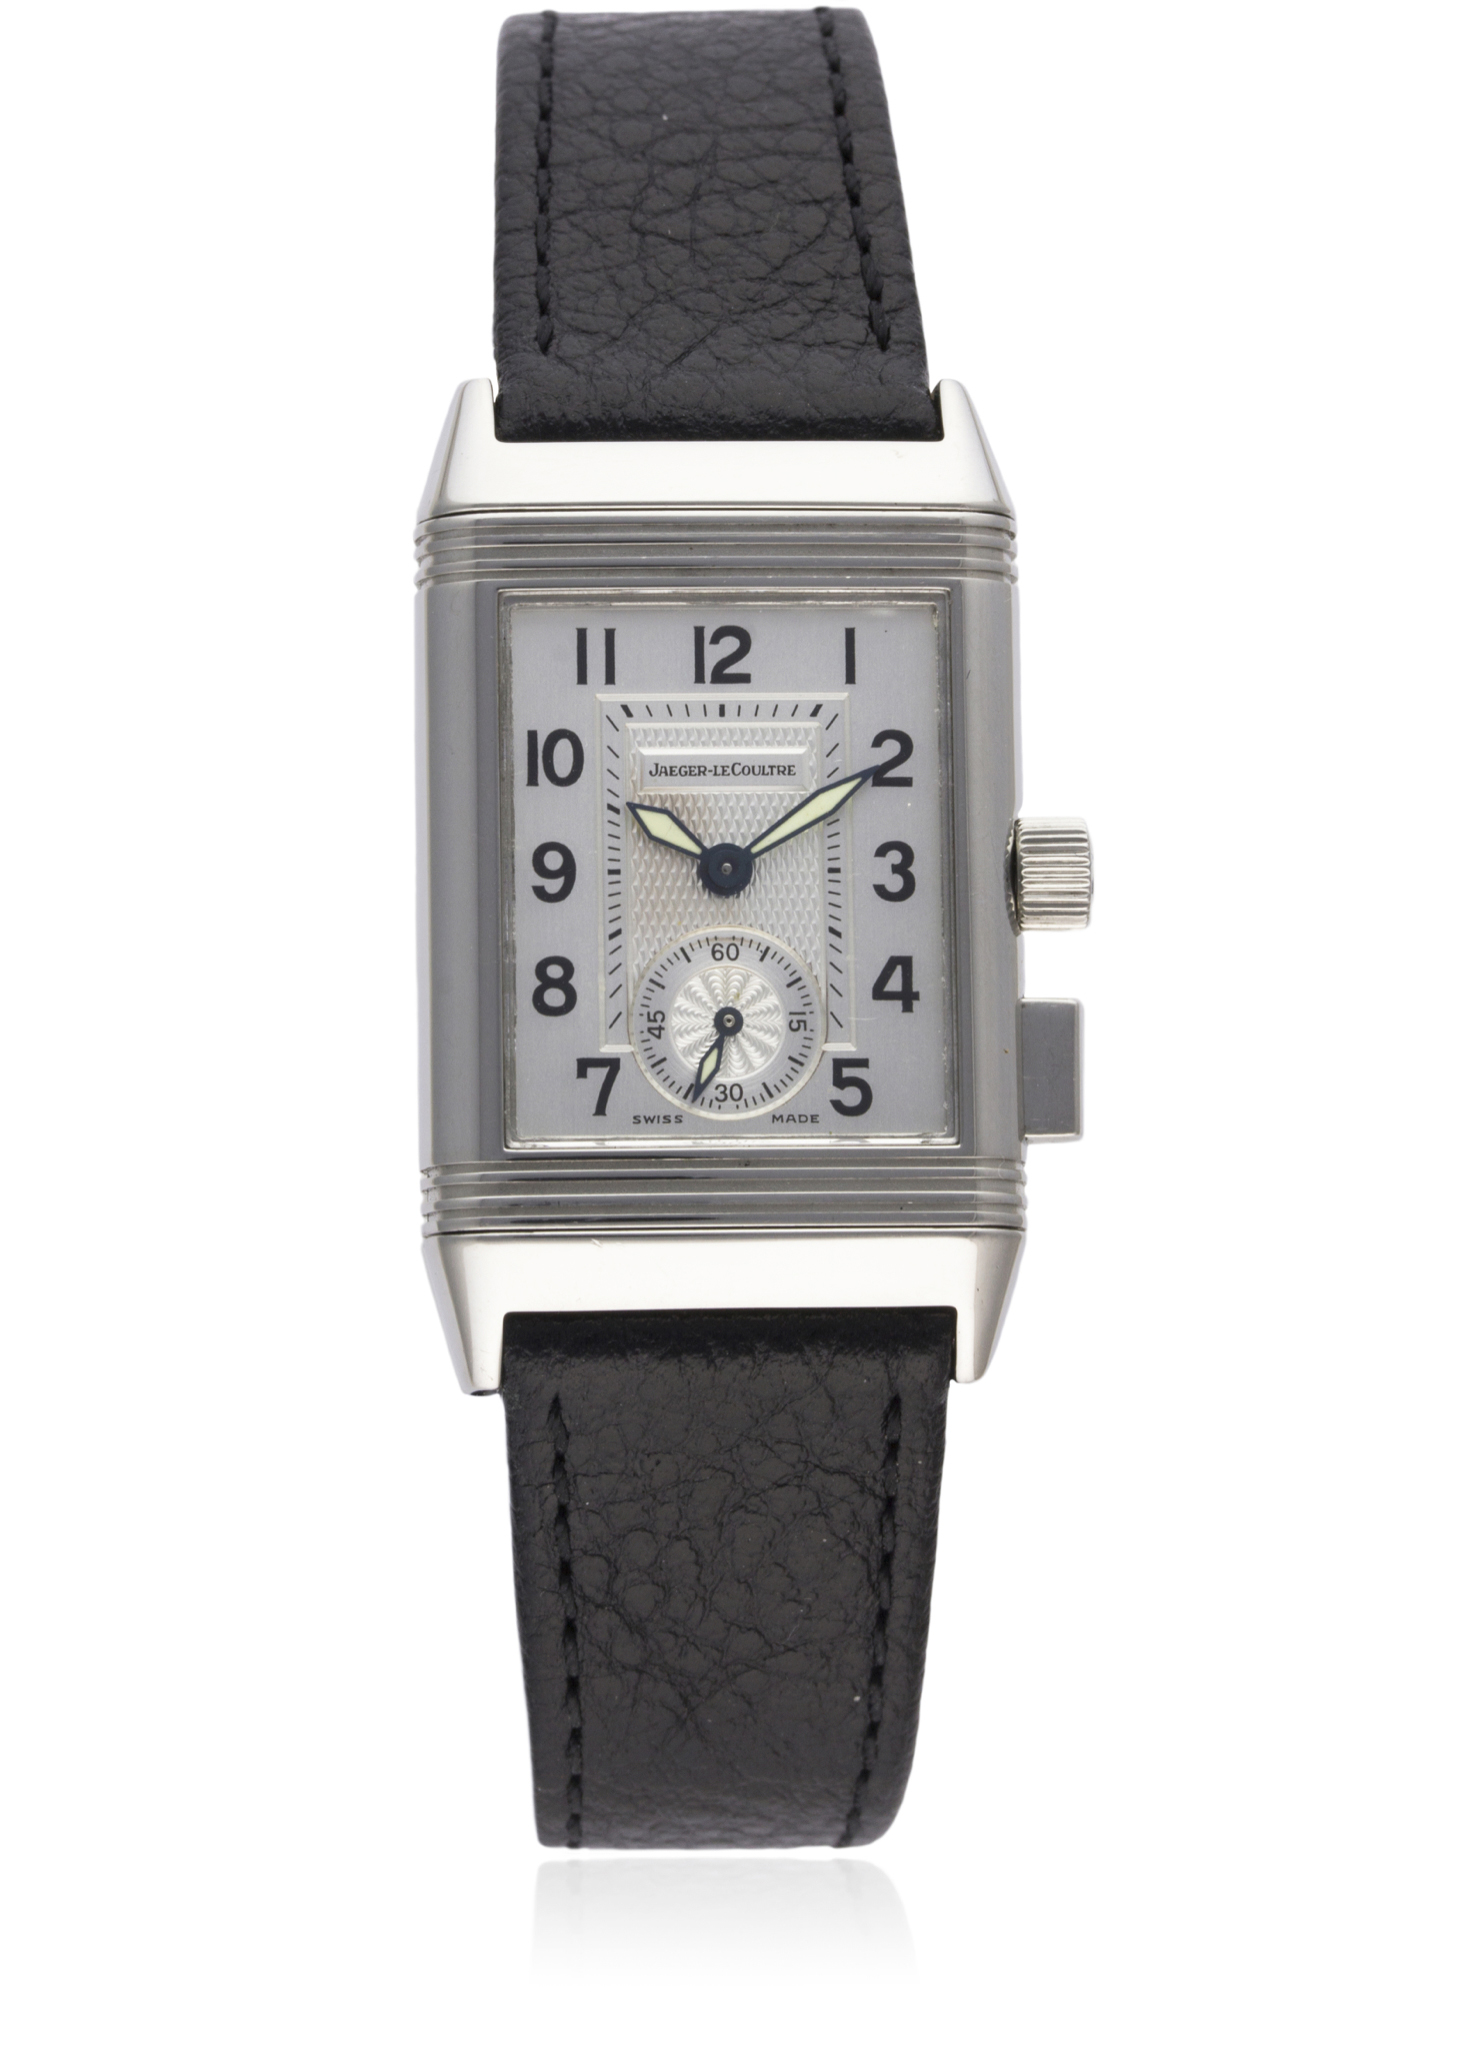 A GENTLEMAN'S STAINLESS STEEL JAEGER LECOULTRE REVERSO MEMORY WRIST WATCH DATED 2000, REF. 255.8.